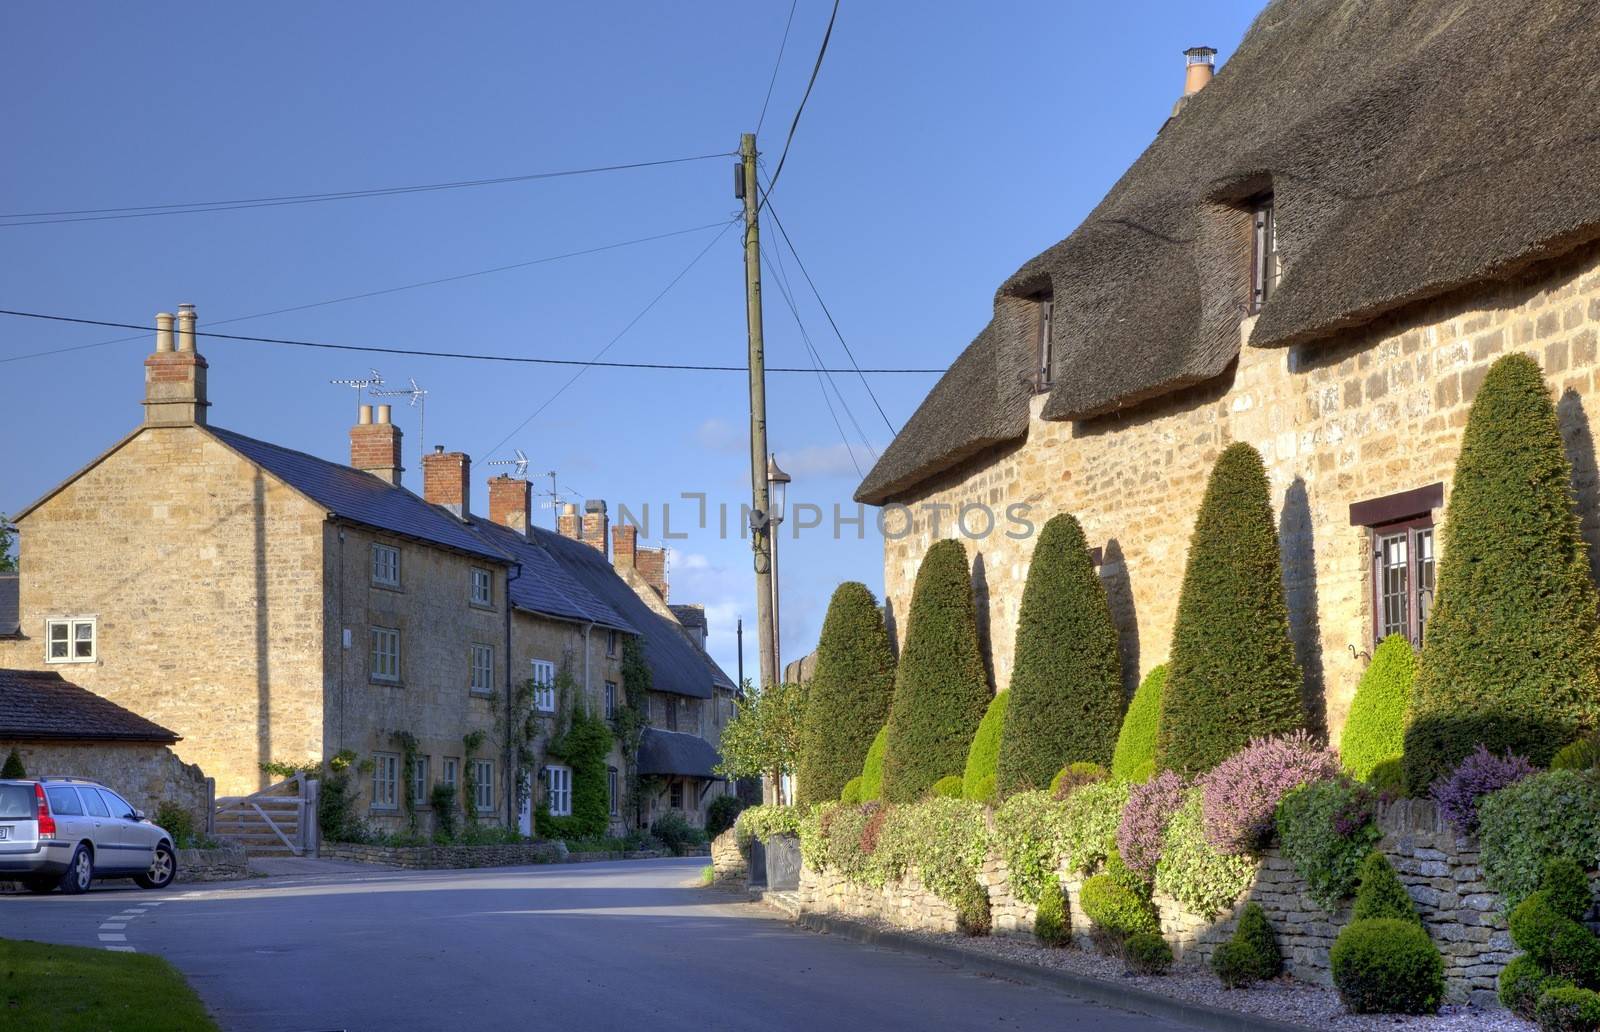 Clipped topiary outside thatched cottage, Broad Campden near Chipping Campden, Gloucestershire, England.